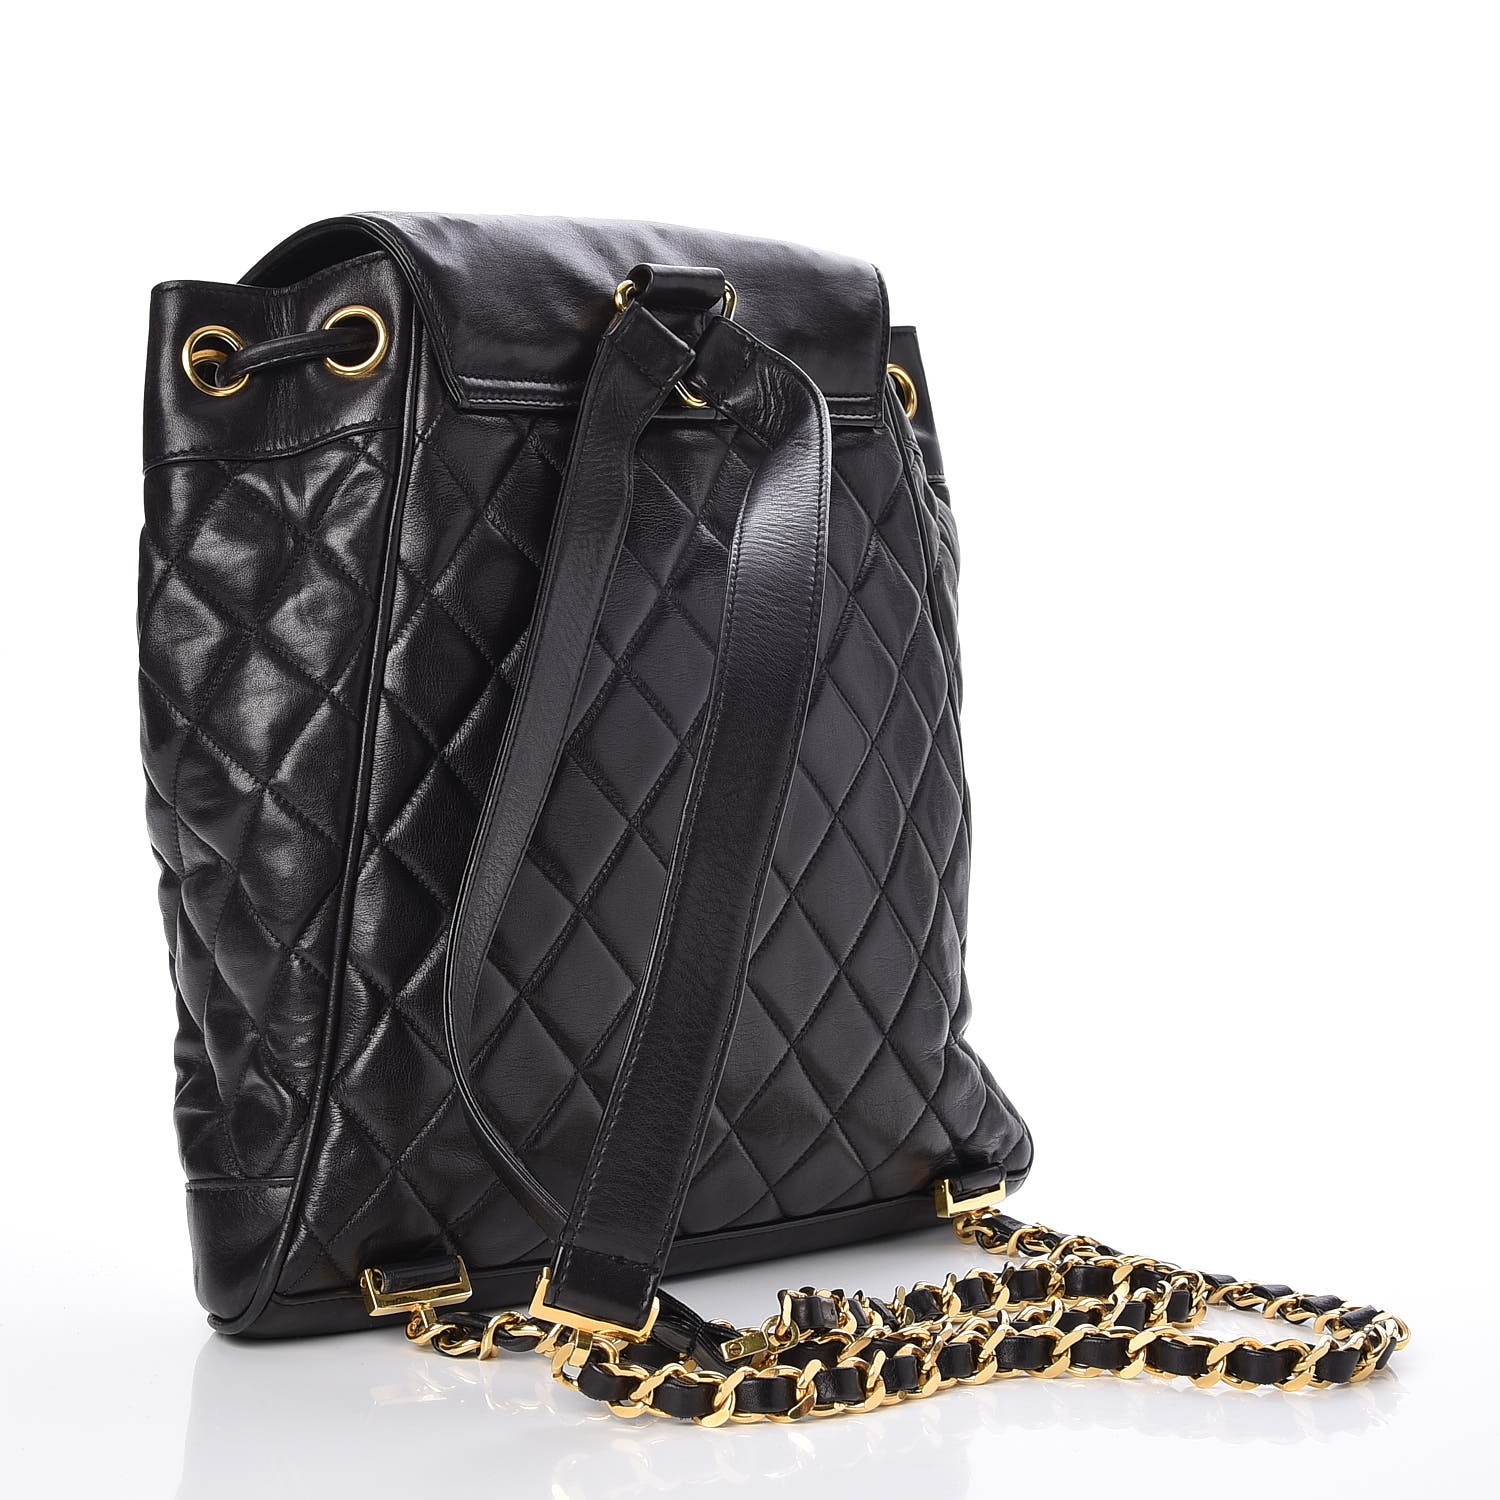 CHANEL Lambskin Quilted Drawstring Backpack Black 253870